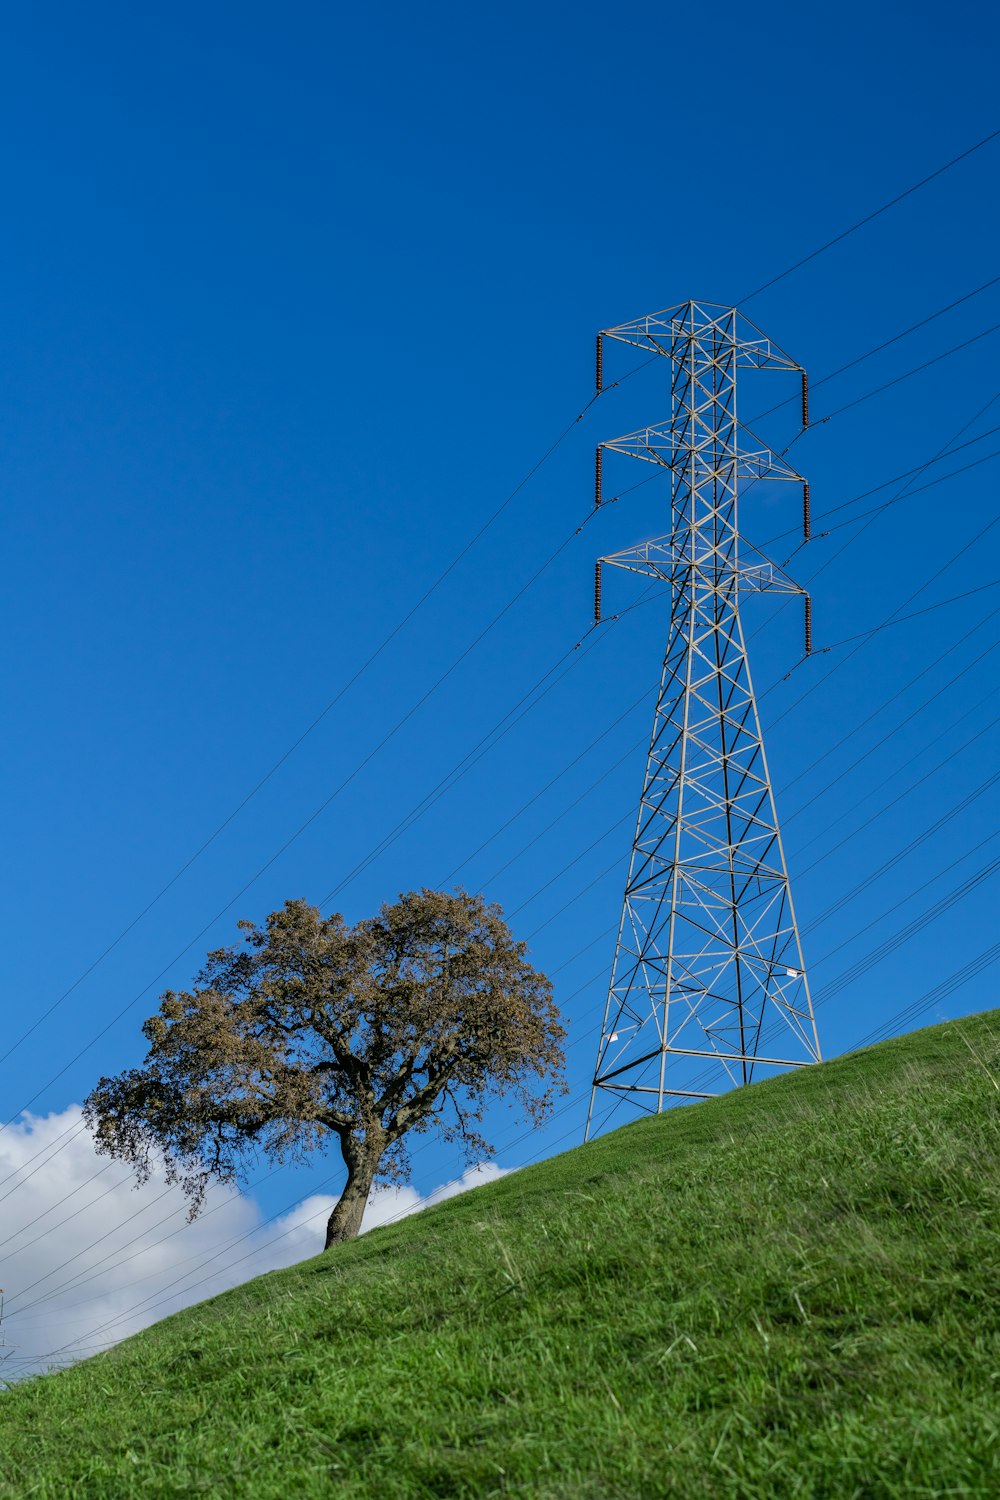 a lone tree on a hill with power lines in the background